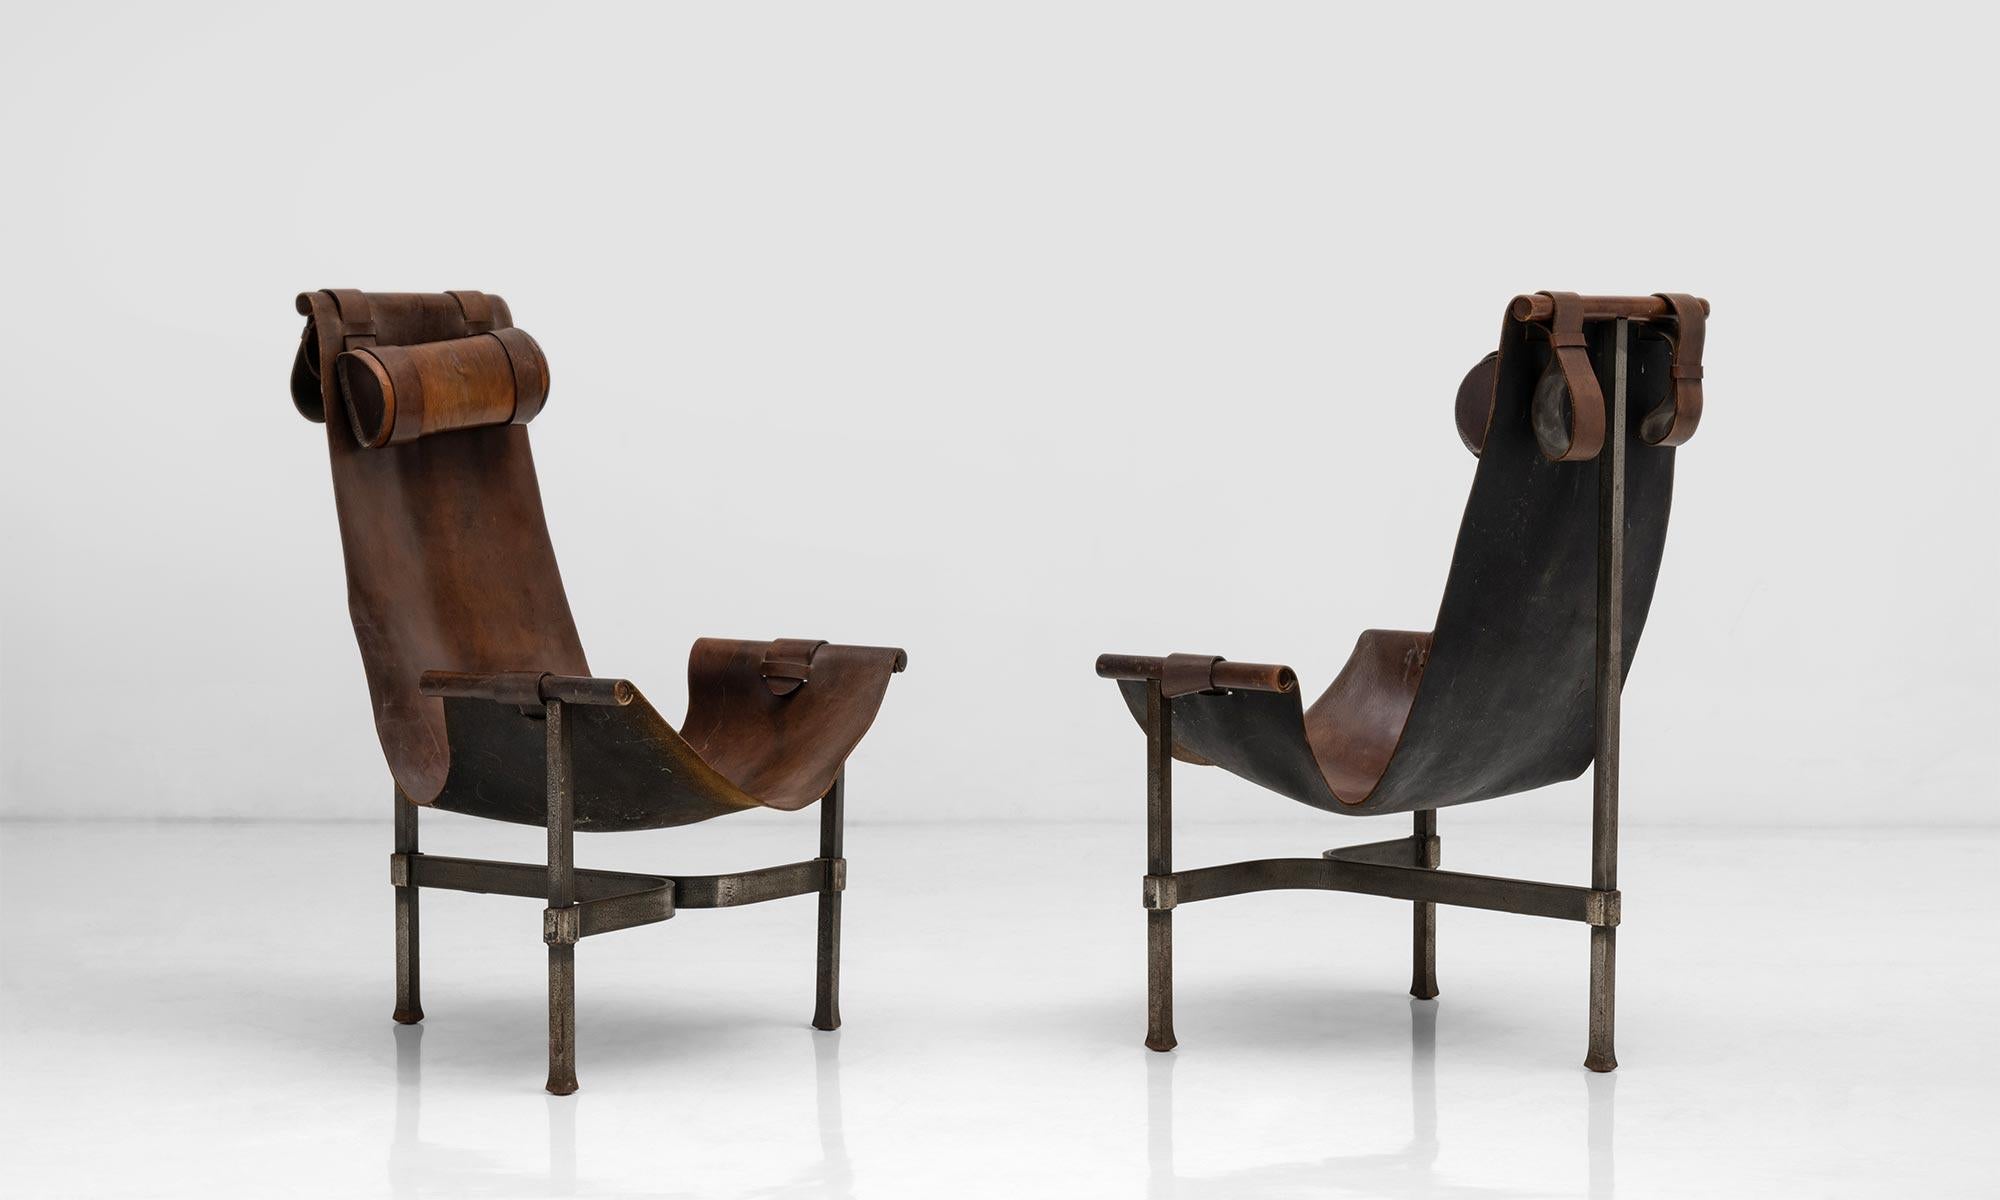 Steel & leather sling chairs,

Spain Circa 1960,

Steel frames in “T” arrangement and original thick leather seats,

Measures: 26” W x 26.5” D x 41.5” H x 13.5”seat x 22